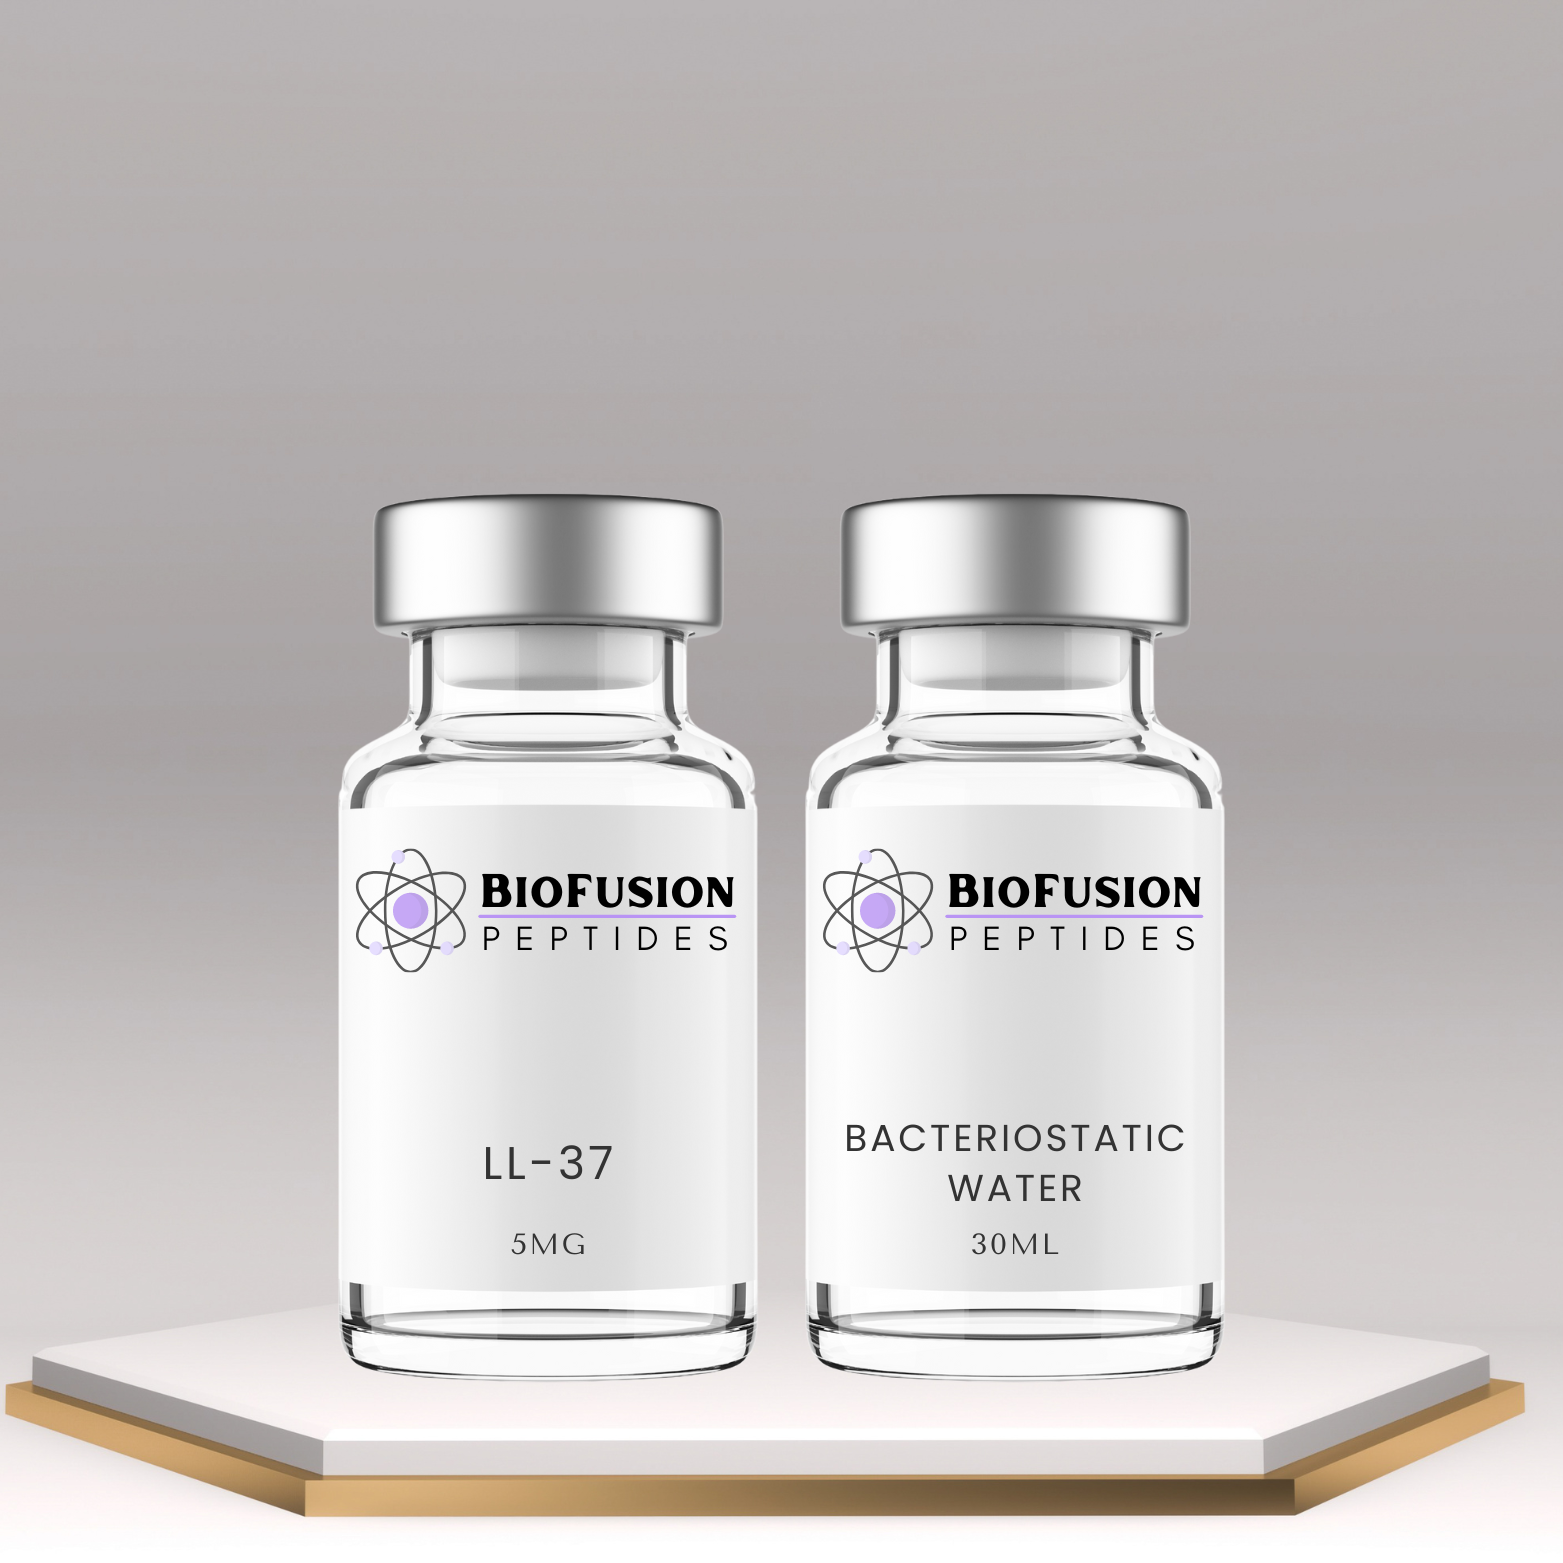 BioFusion Peptides LL-37 kit with bacteriostatic water